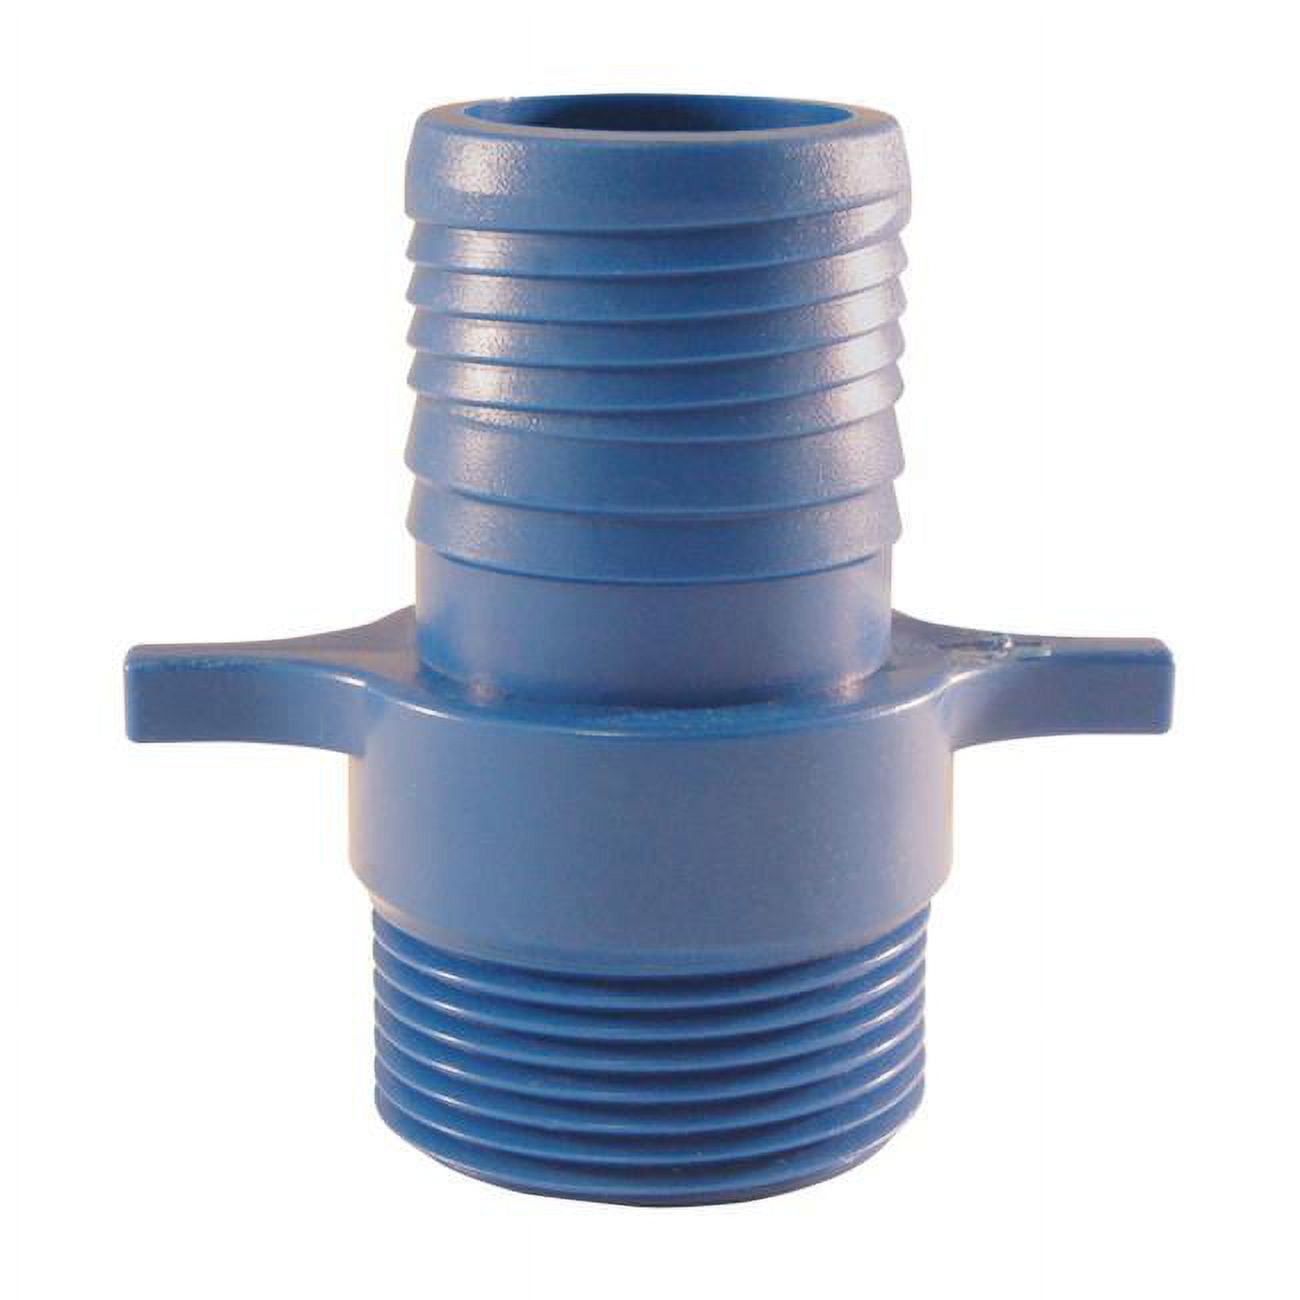 4814661 1 In. Insert X 1 In. Dia. Mpt Polypropylene Male Adapter, Blue